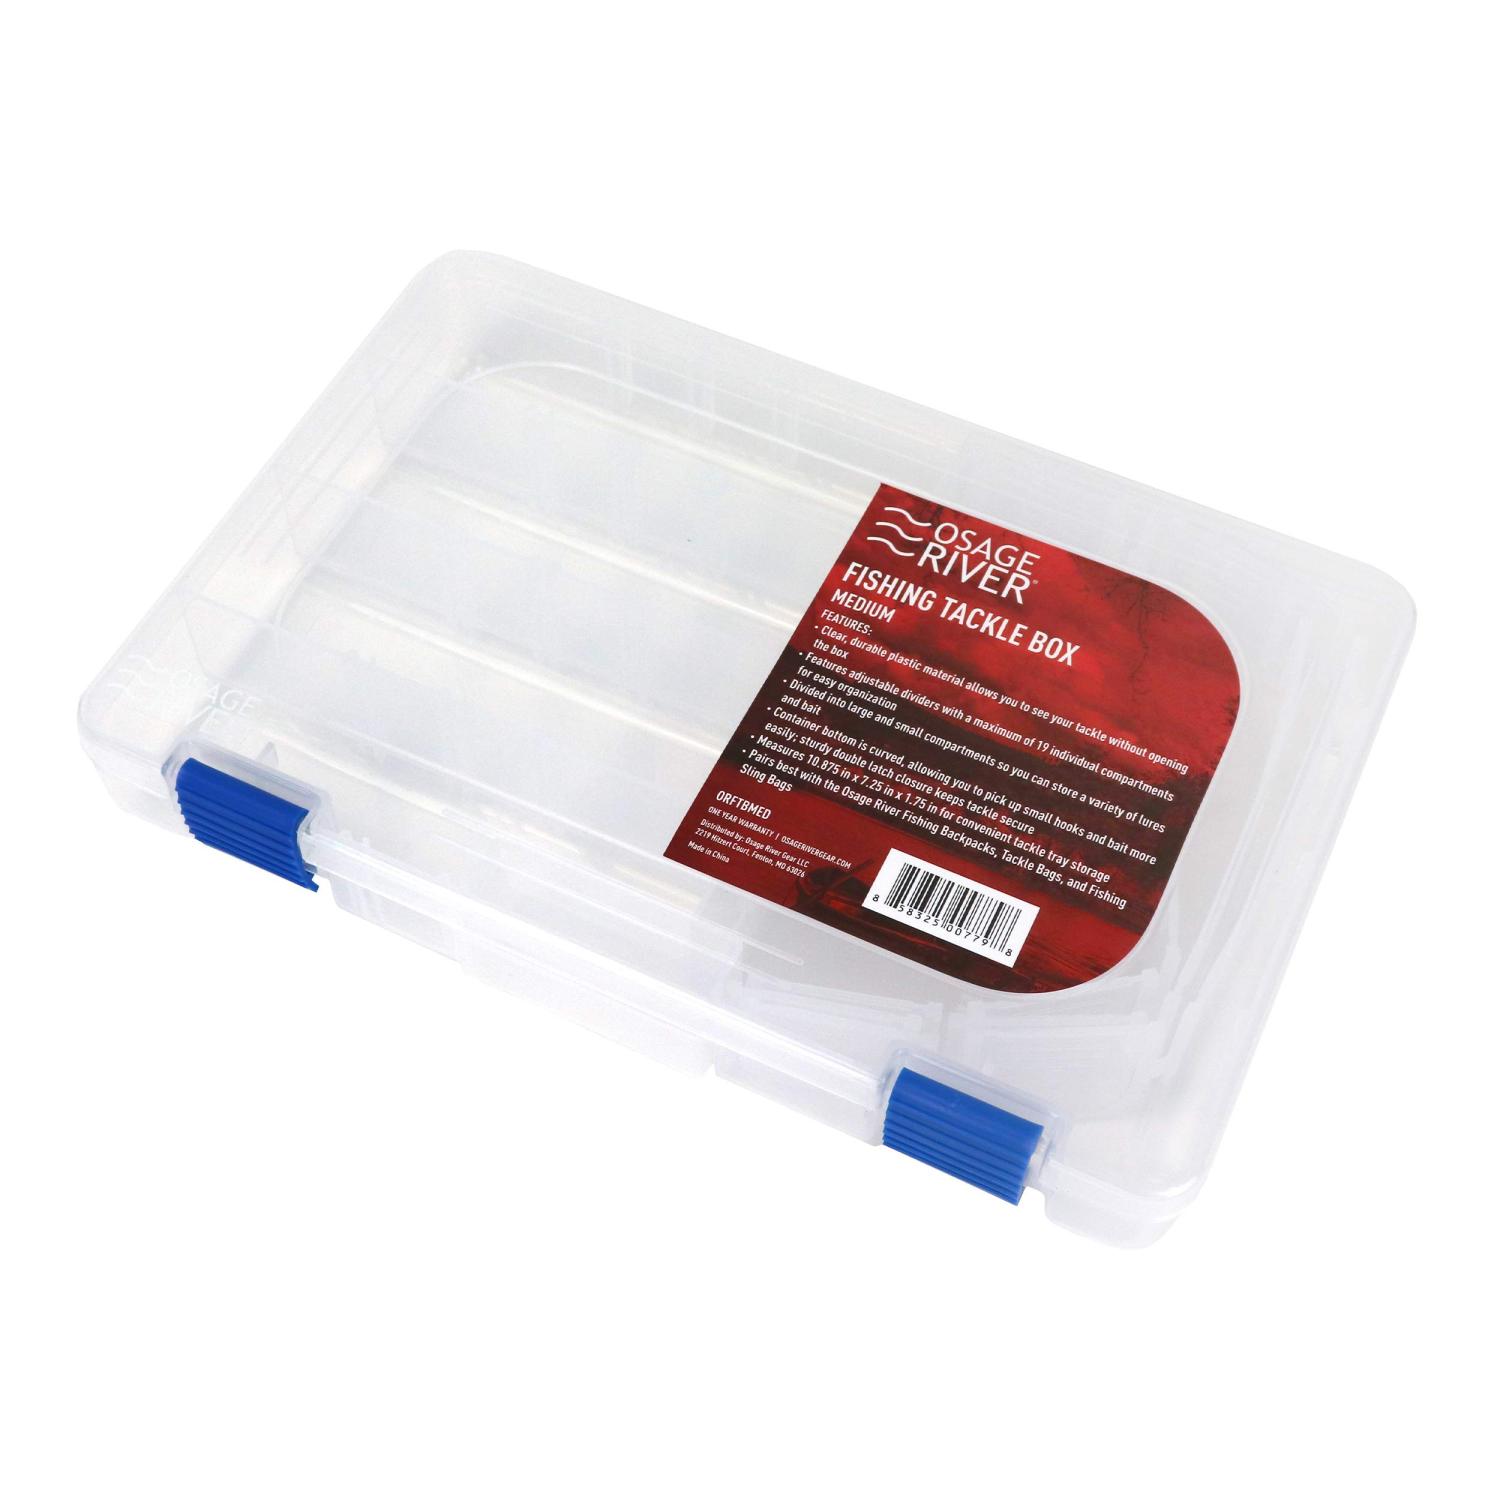 Food Grade Plastic Boxes  Extra Small Plastic Boxes